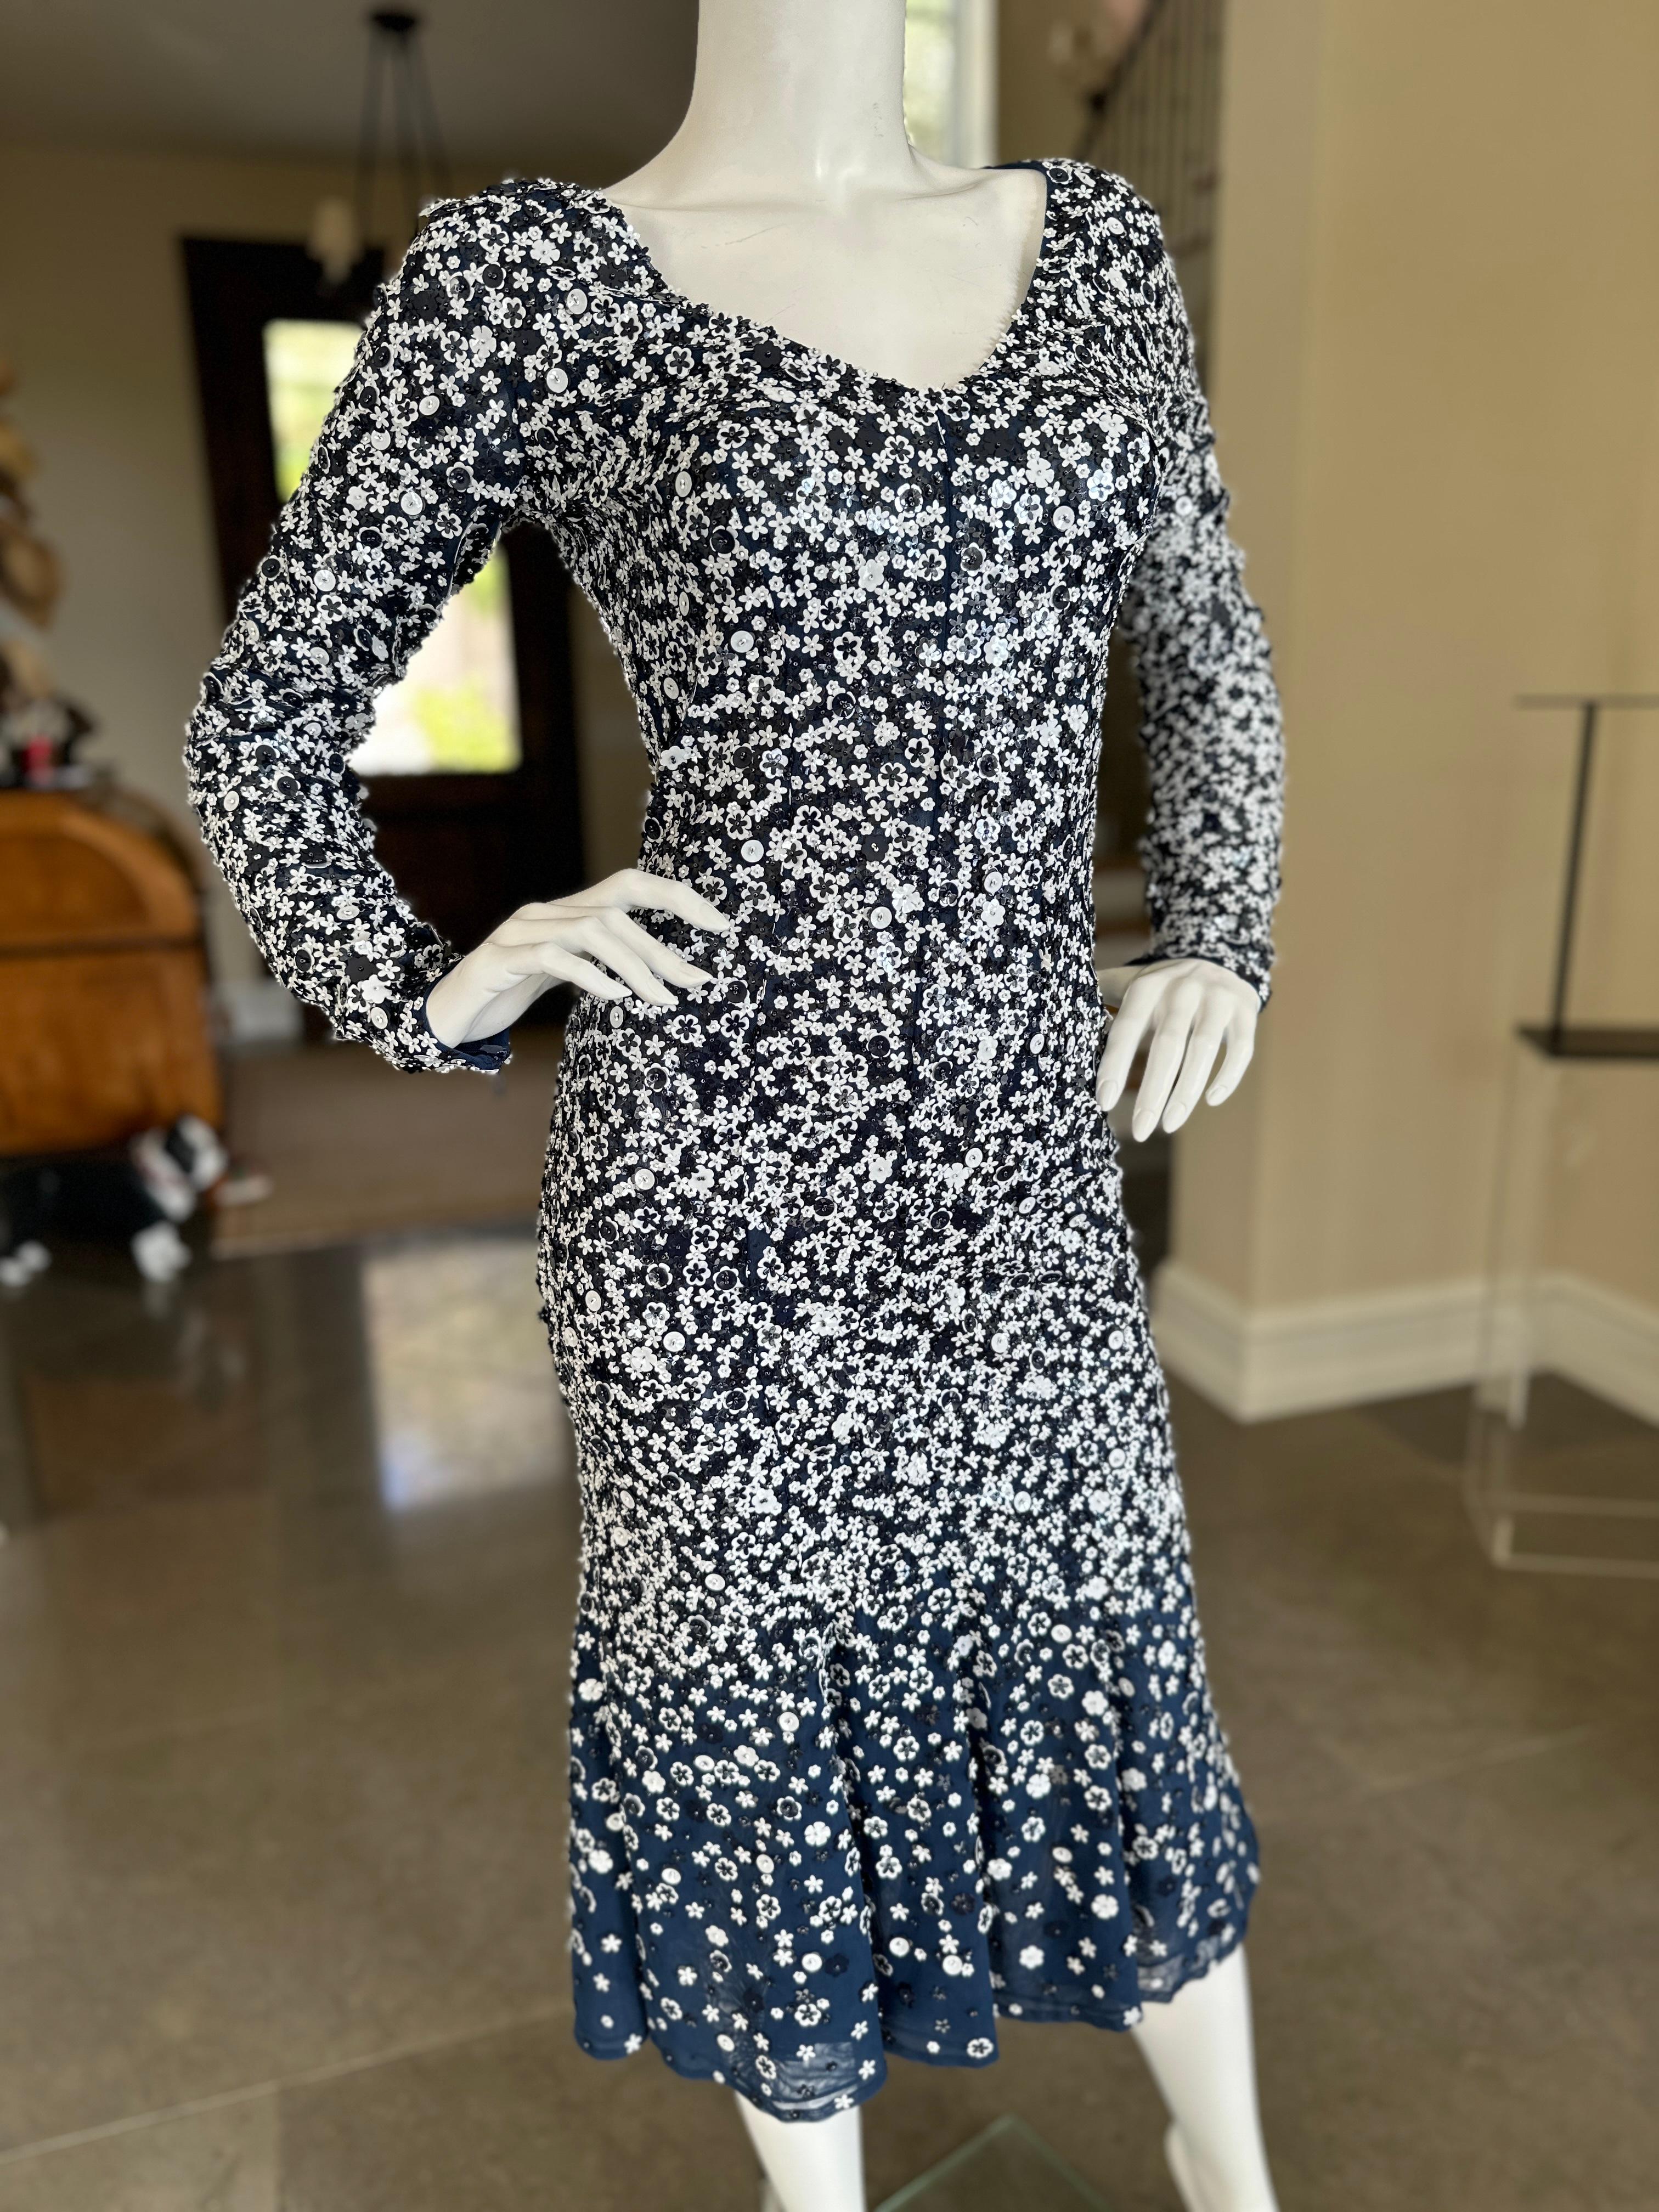 Michael Kors Collection Long Sleeve Blue Dress with Flower Sequin Details In Excellent Condition For Sale In Cloverdale, CA